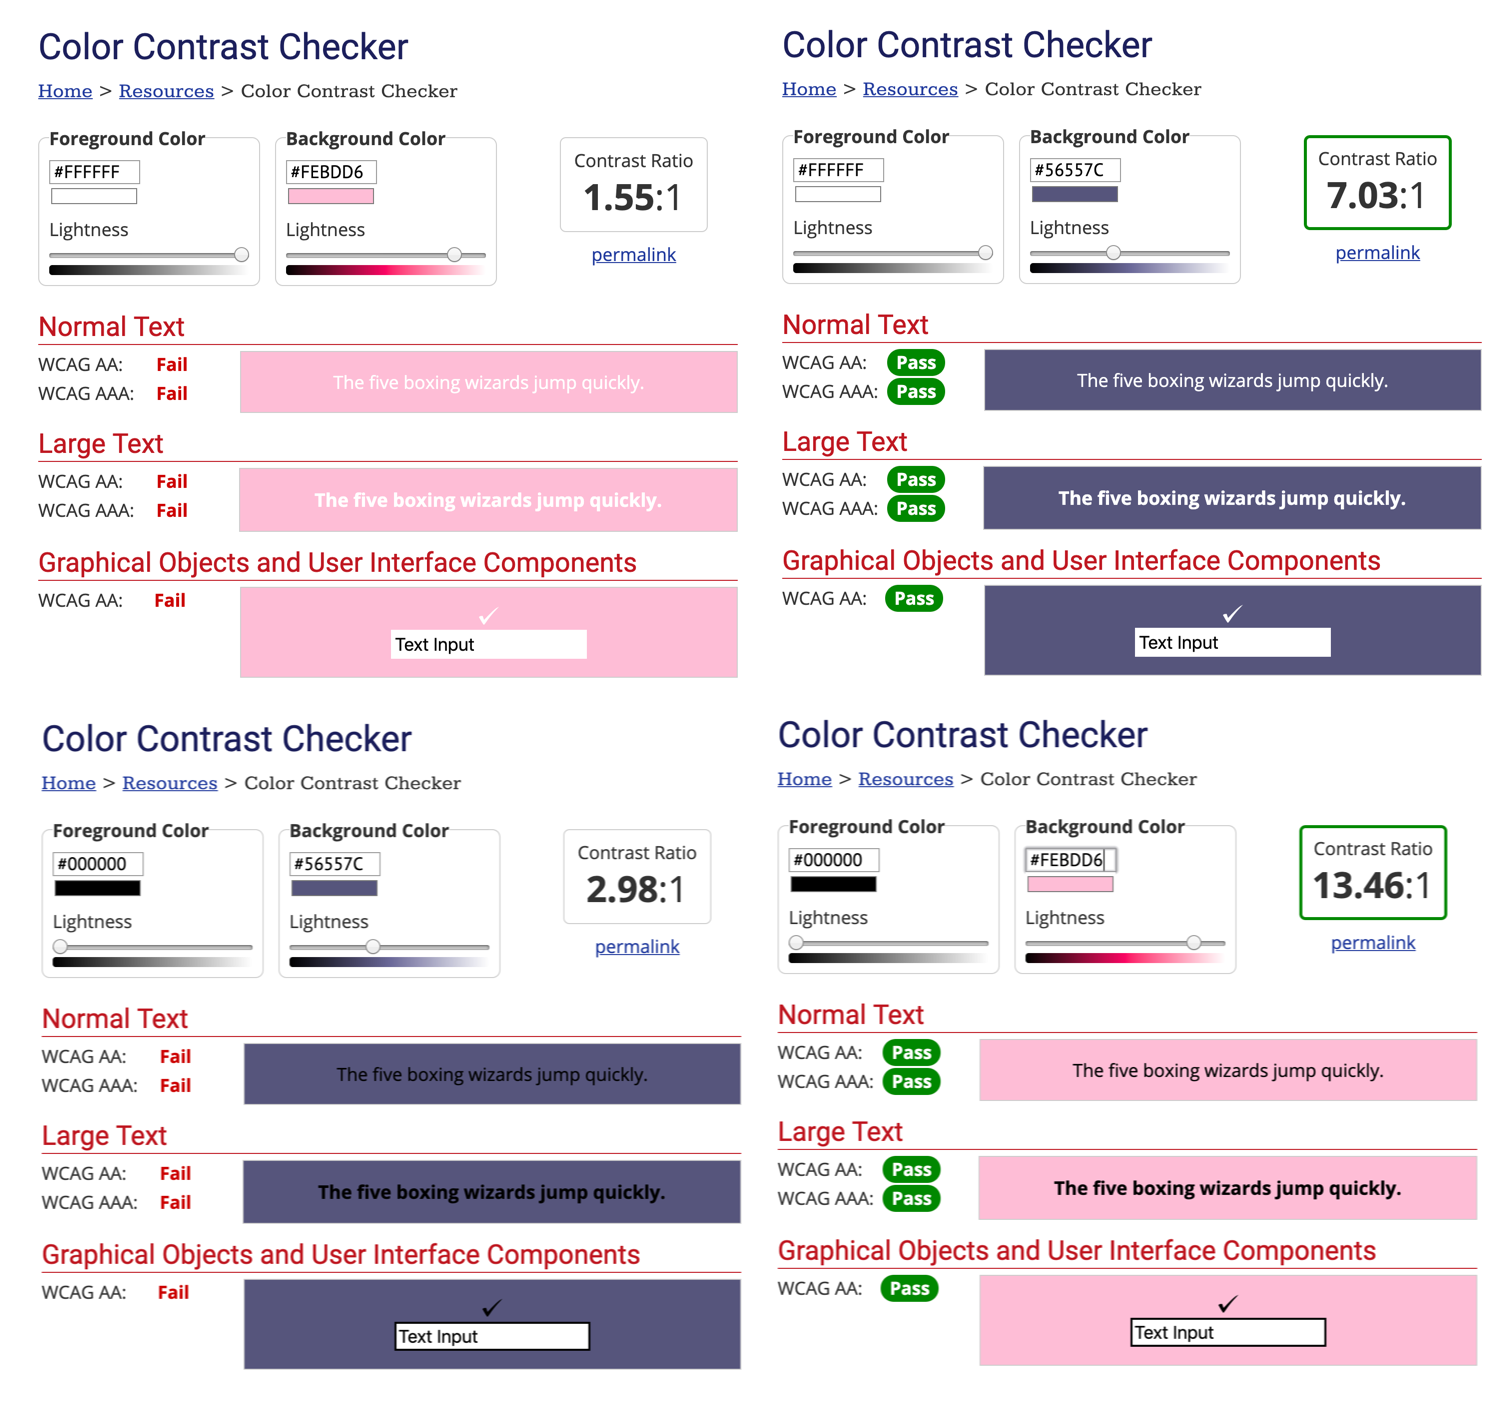 The WebAim contrast checker showing pass and fail statuses for different text and background color combinations.